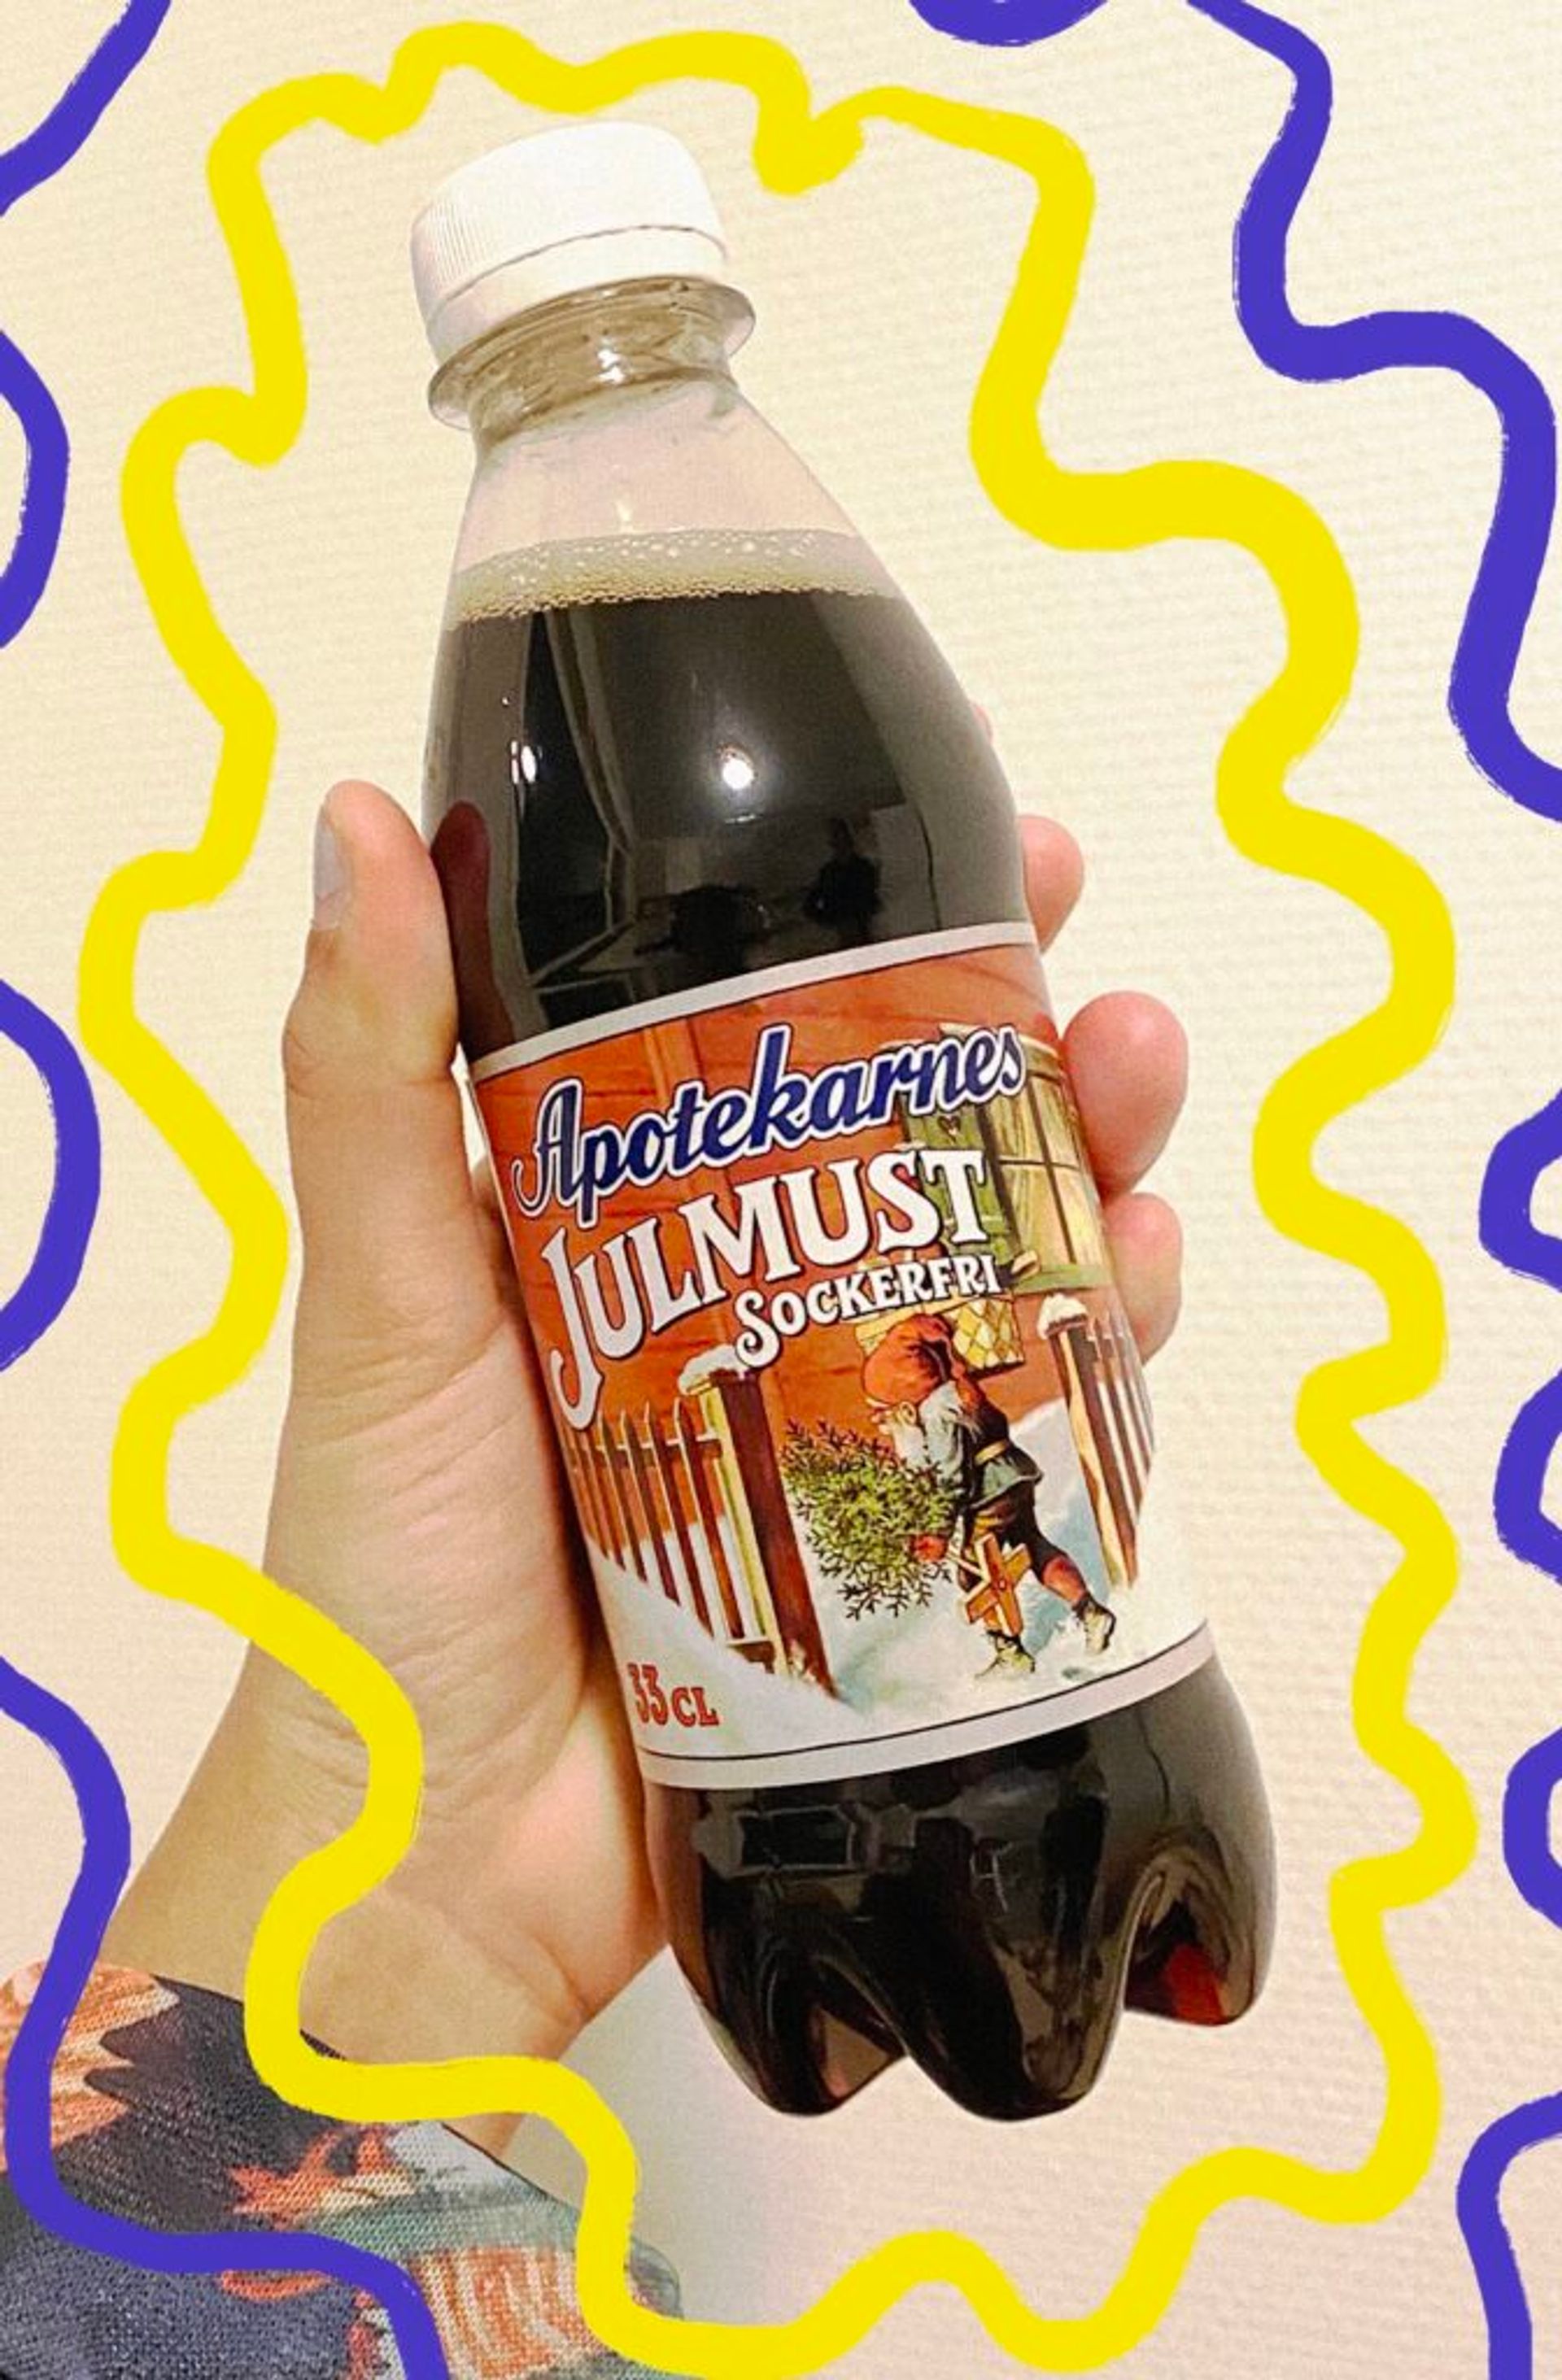 Julmust or Christmas soda typical to Sweden